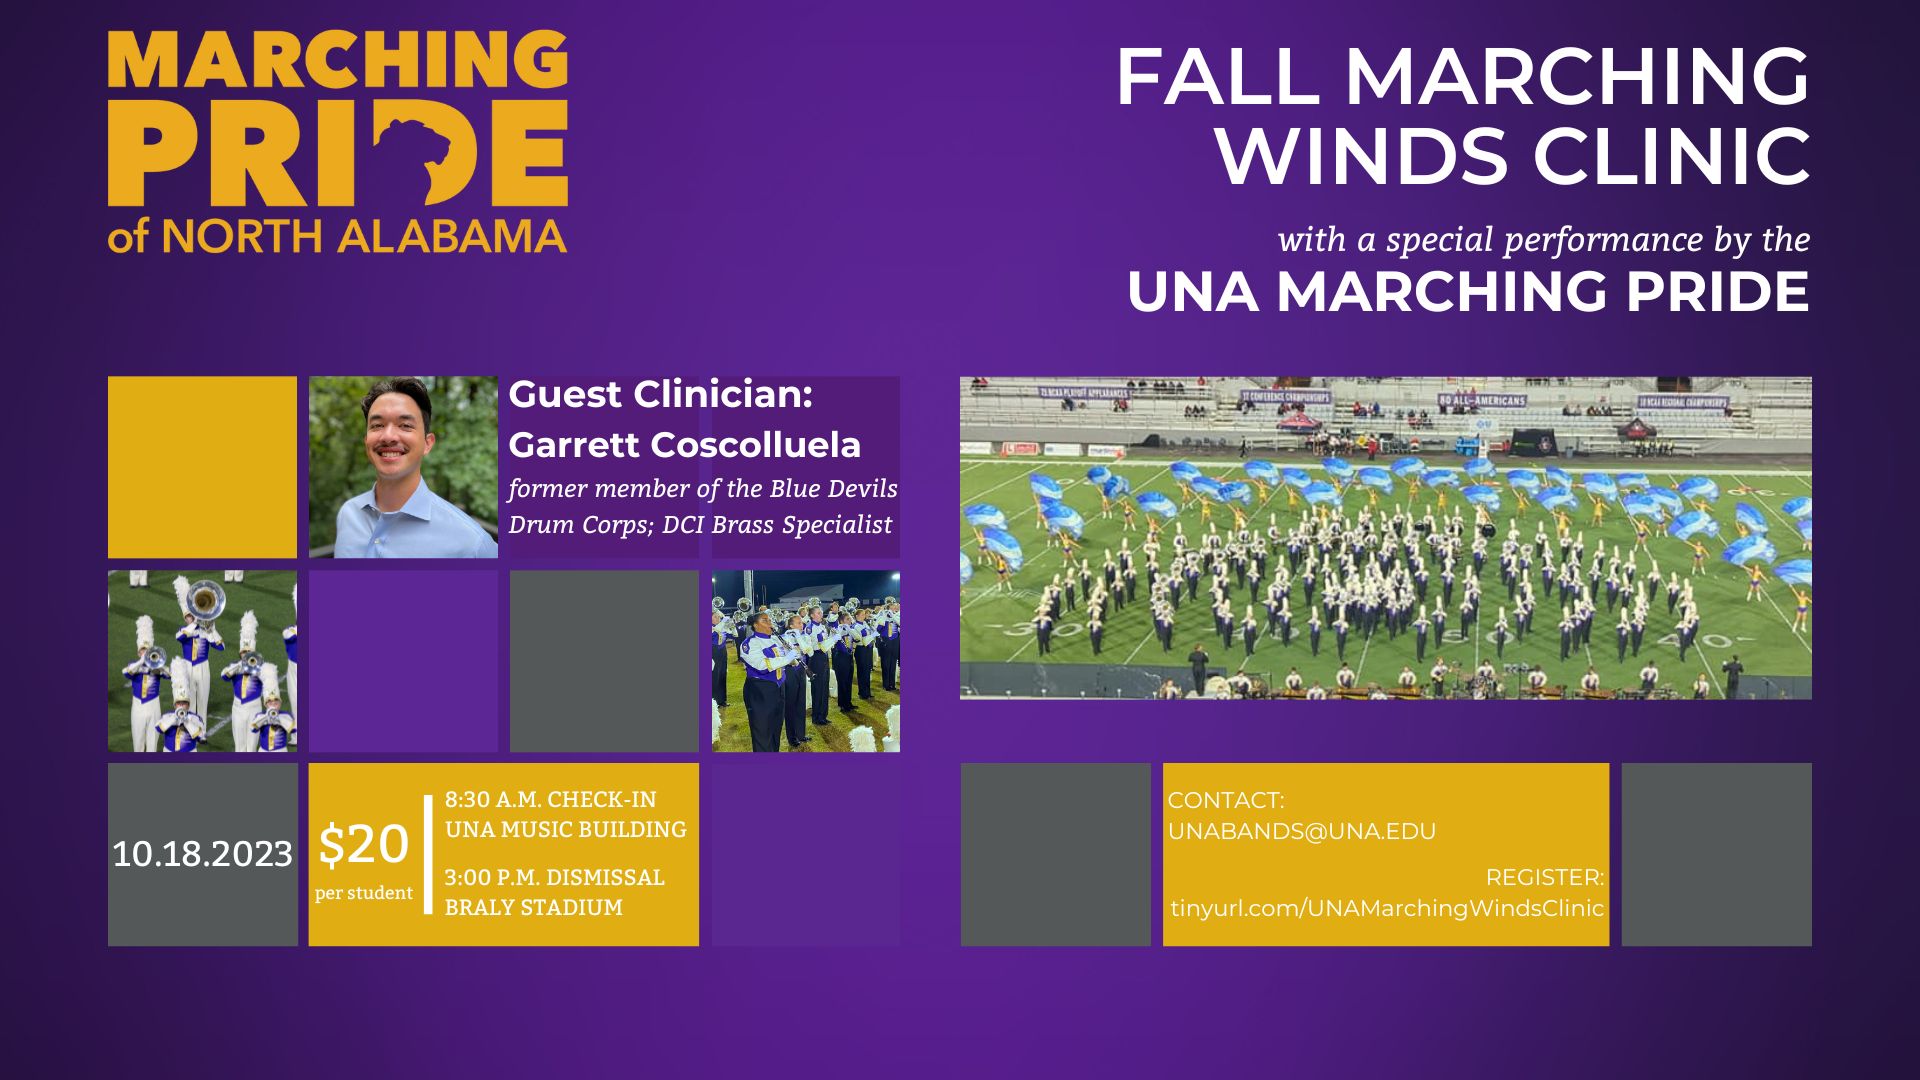 Fall Marching Winds Clinic